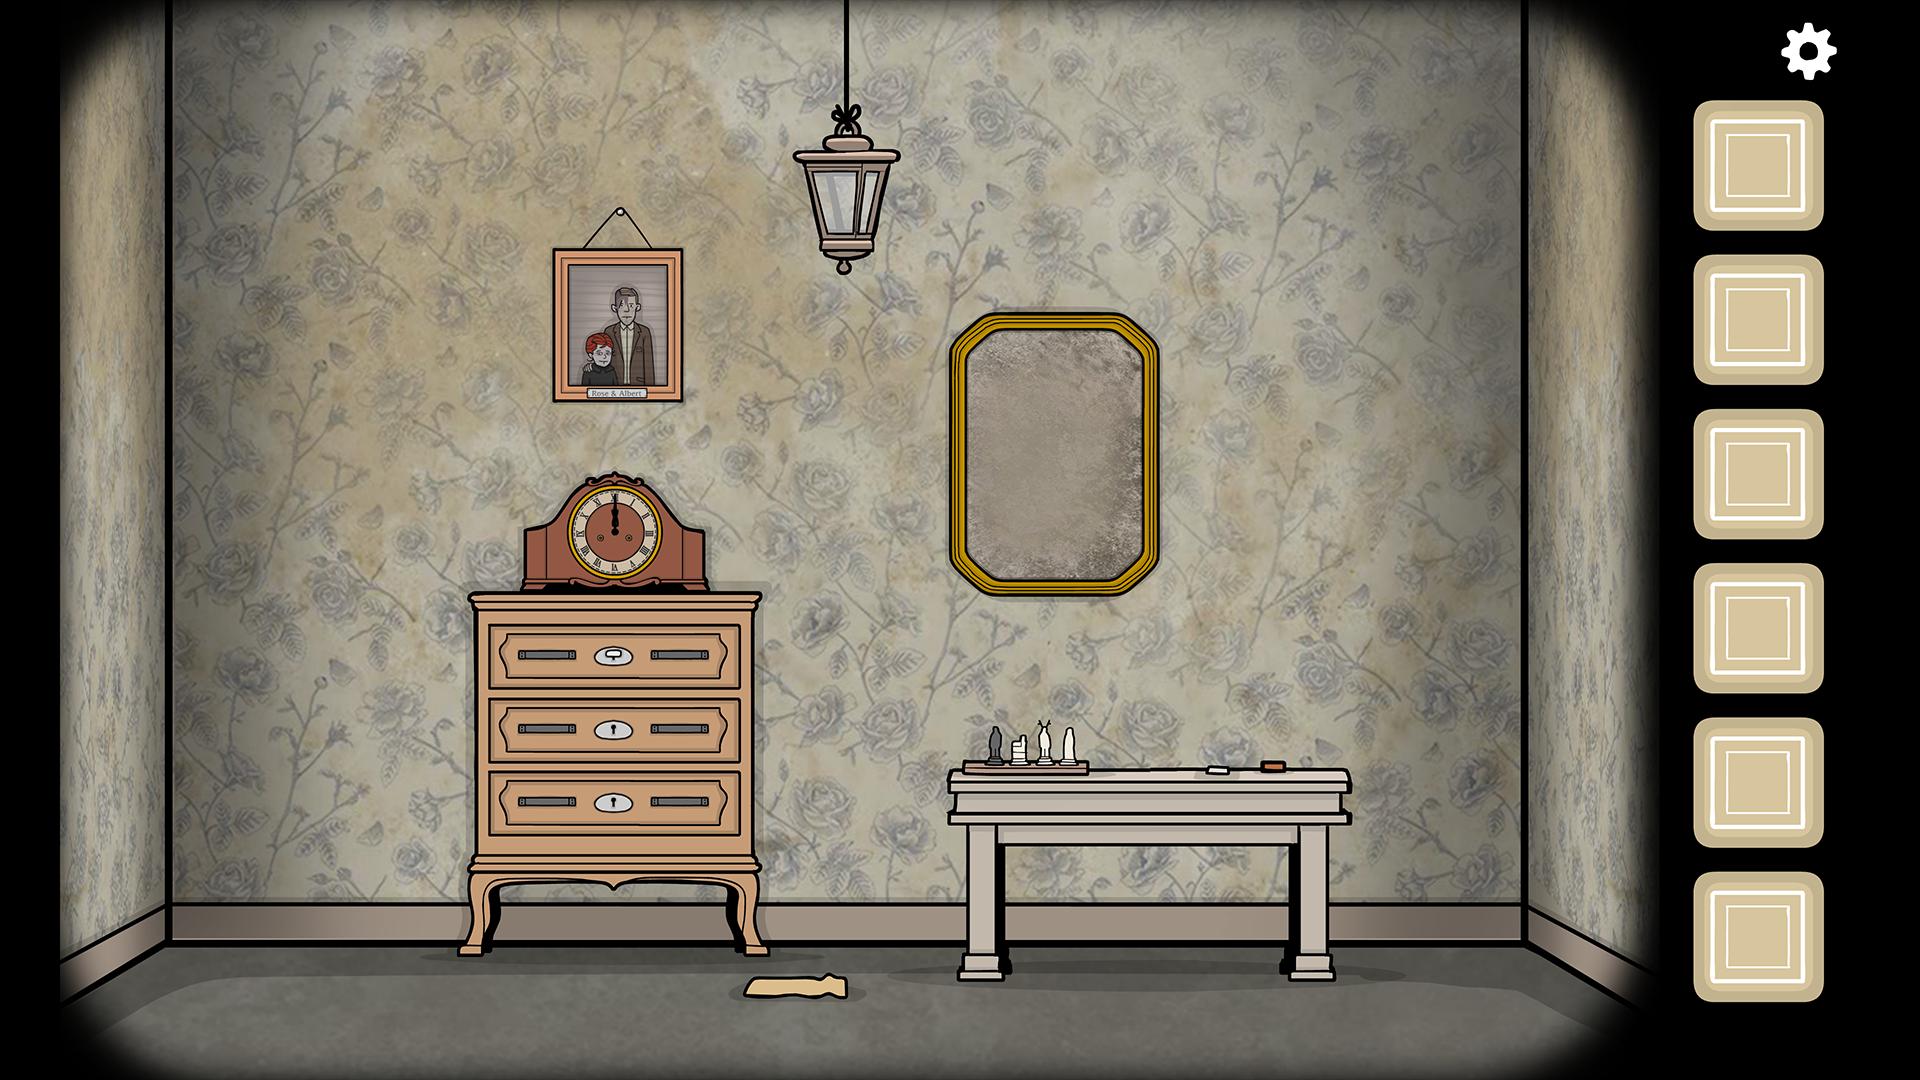 Blossom lite. Игра Rusty Lake the past within. Rusty Lake the past within игра одному. Расти Лейк the past within. Cube Escape the past within.